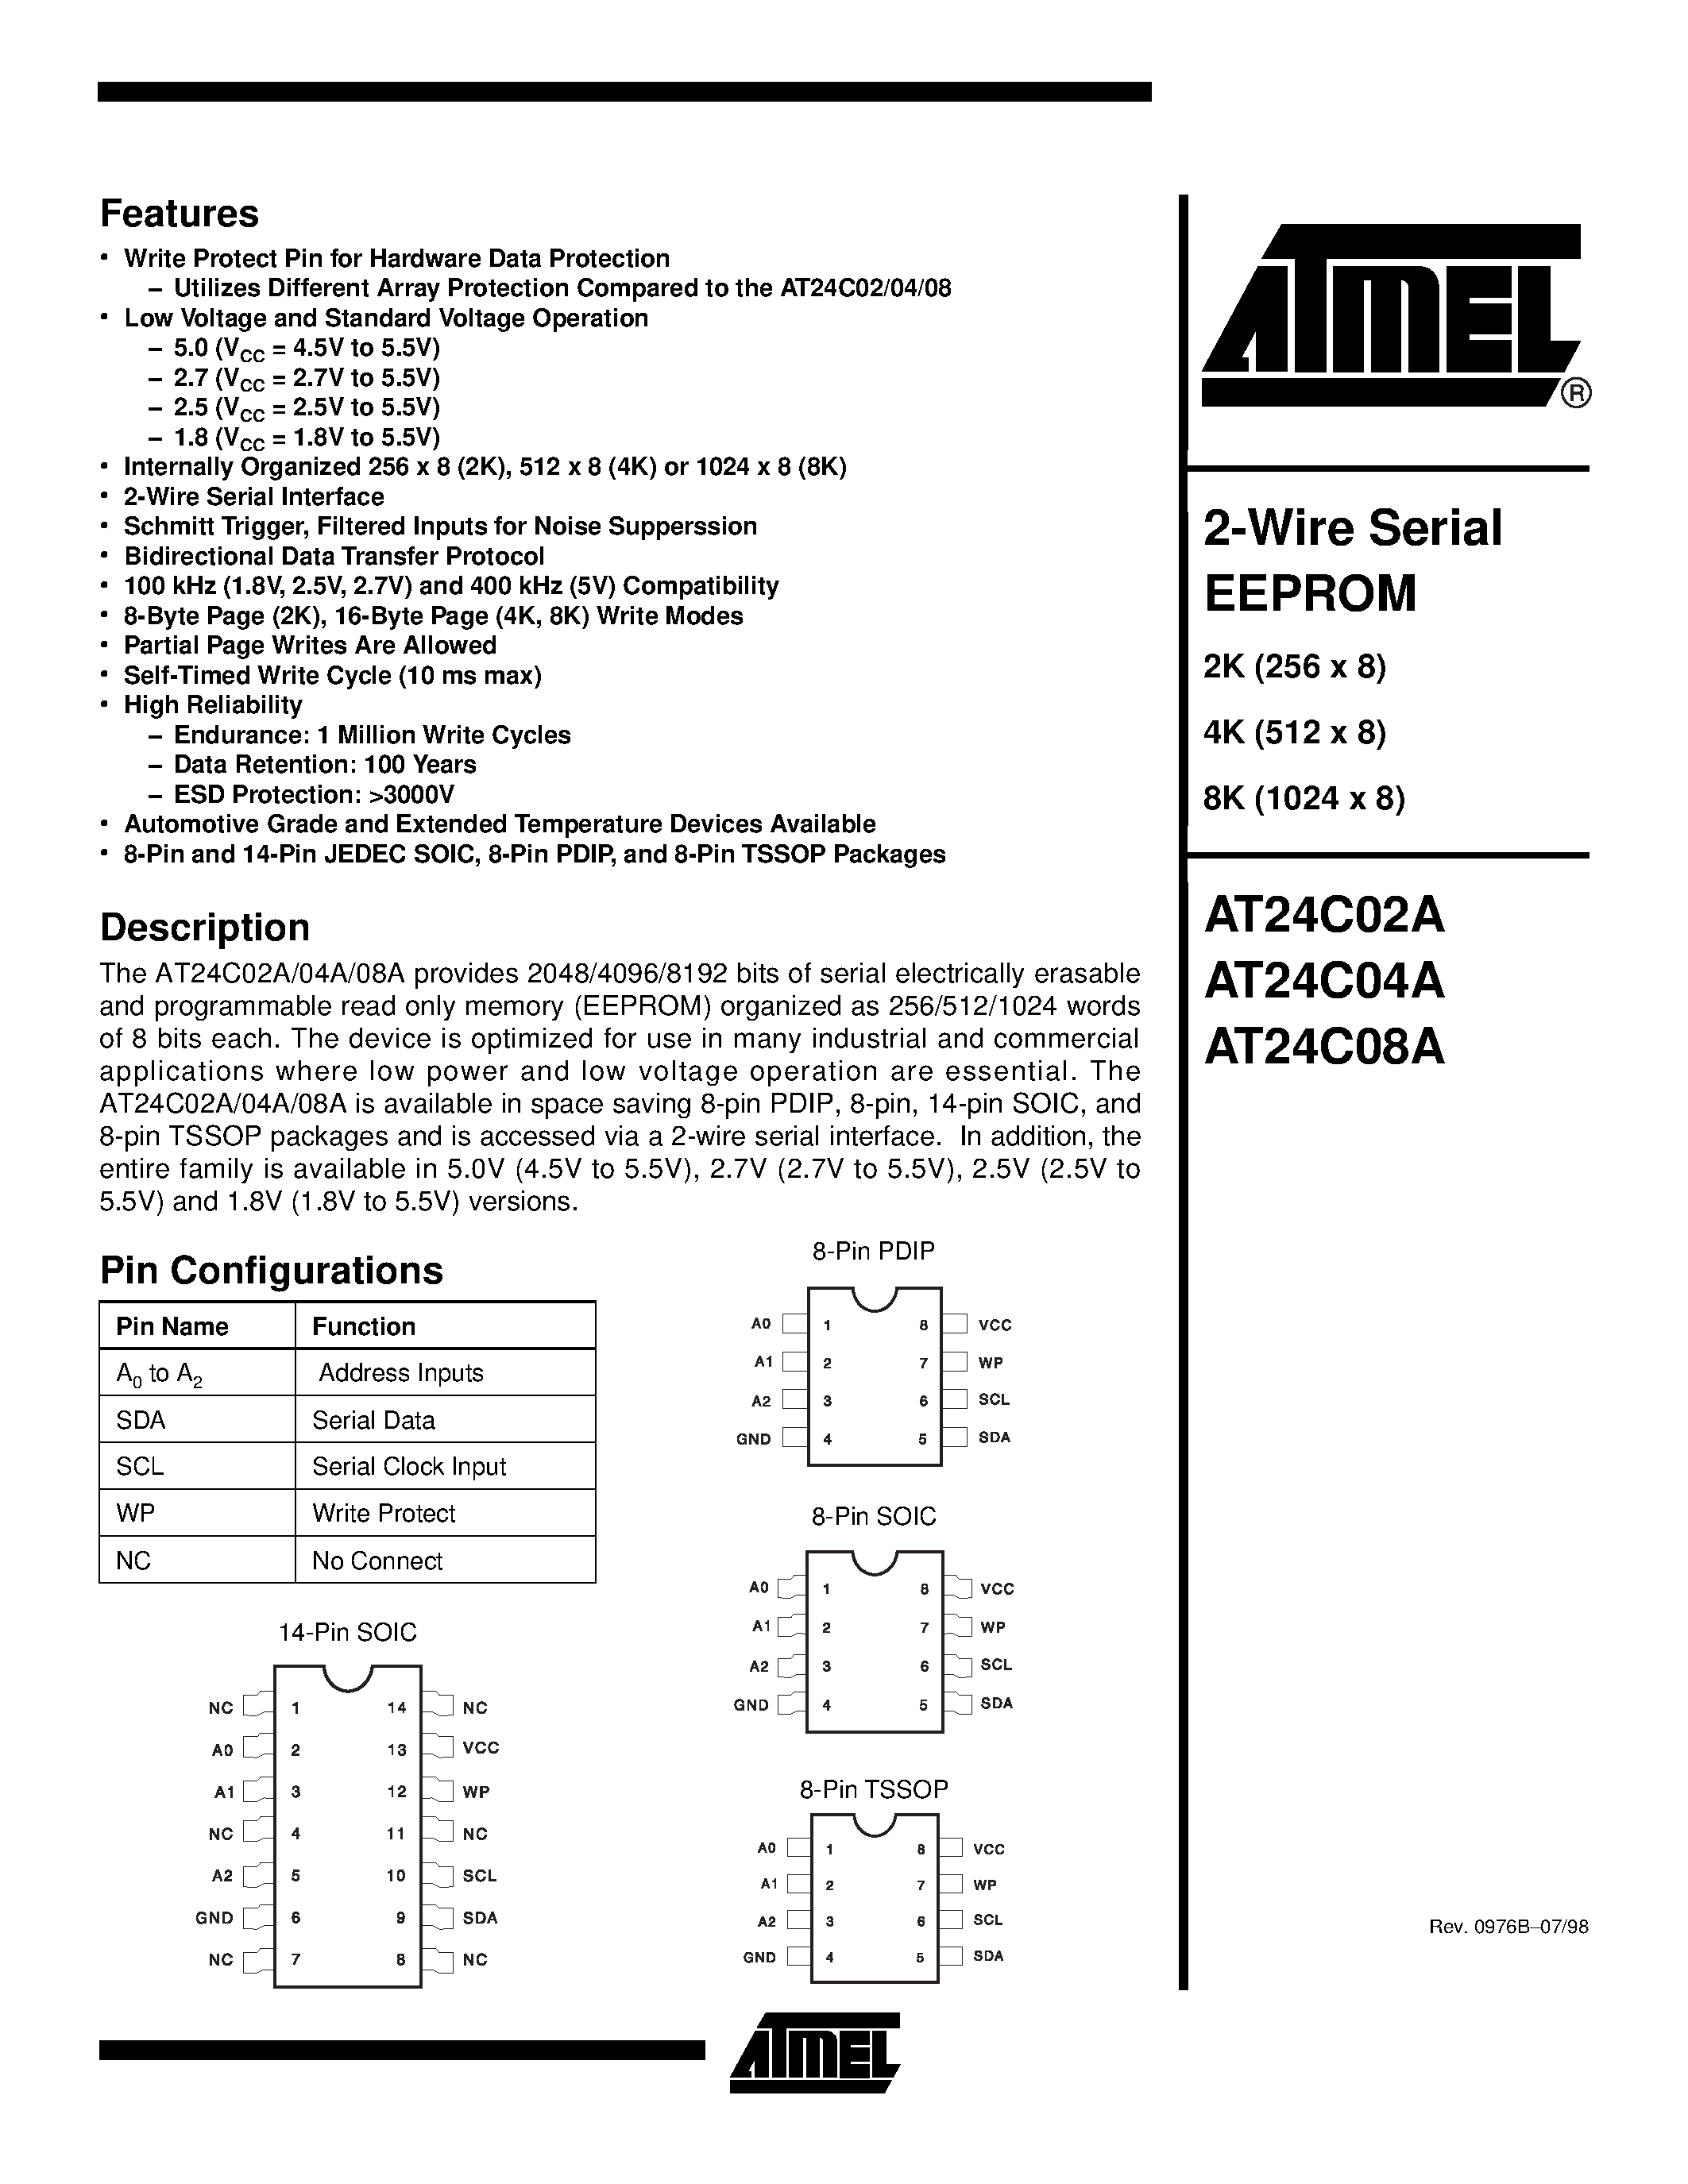 Даташит AT24C02A-10PC-2.5 - 2-Wire Serial EEPROM страница 1